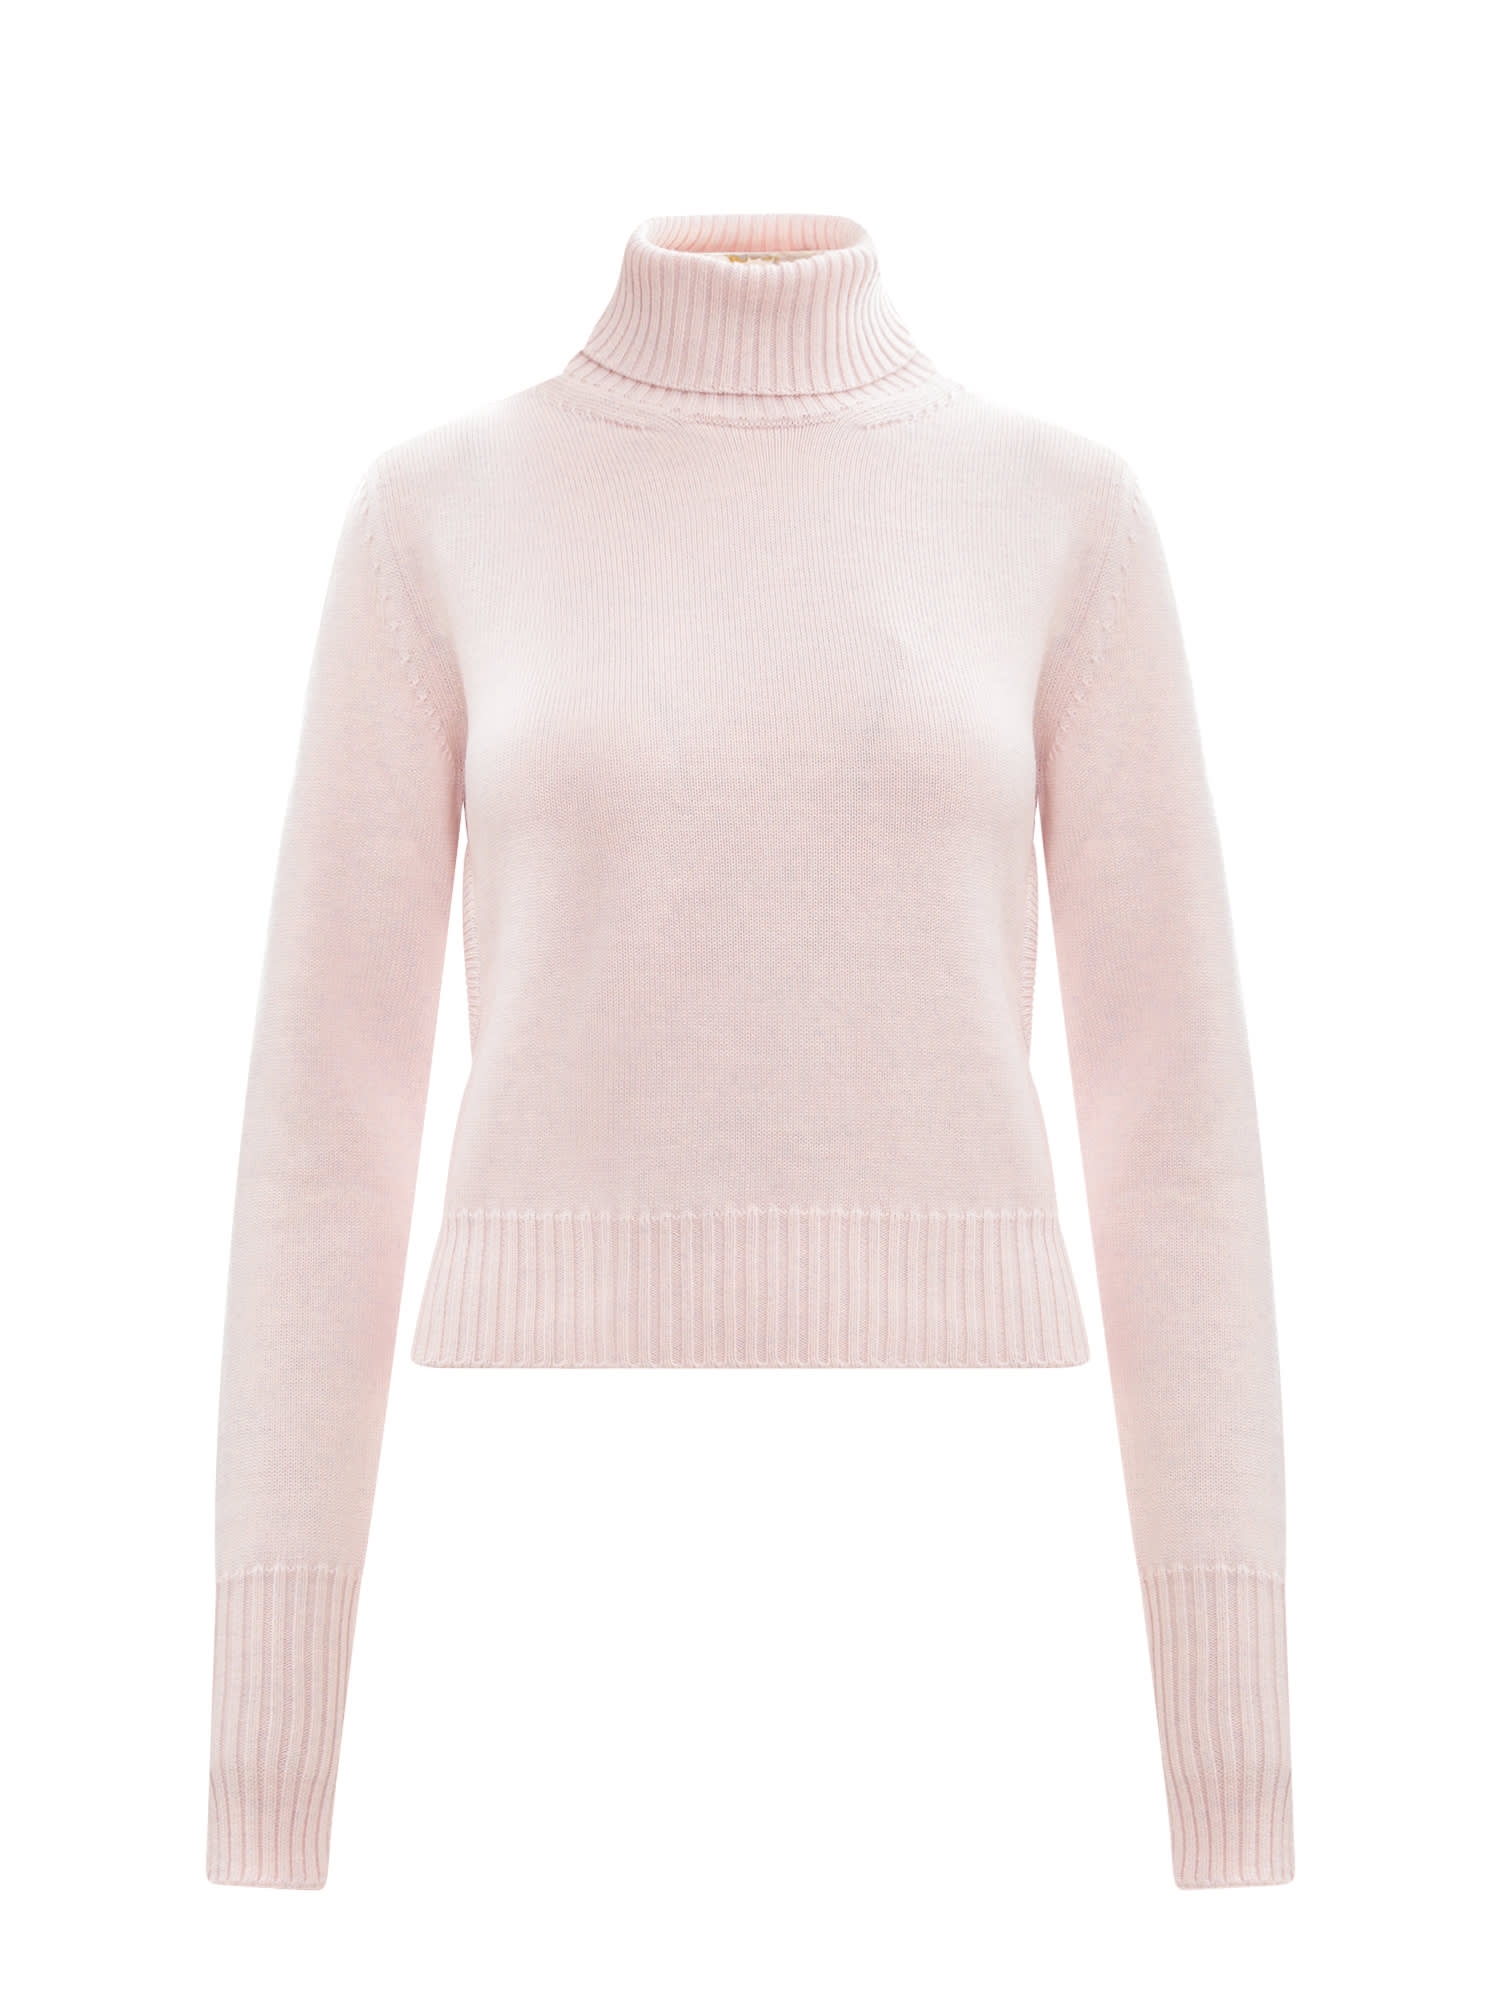 PAUSE or Skip: MM6 Maison Margiela Neutral Layered Sweater – PAUSE